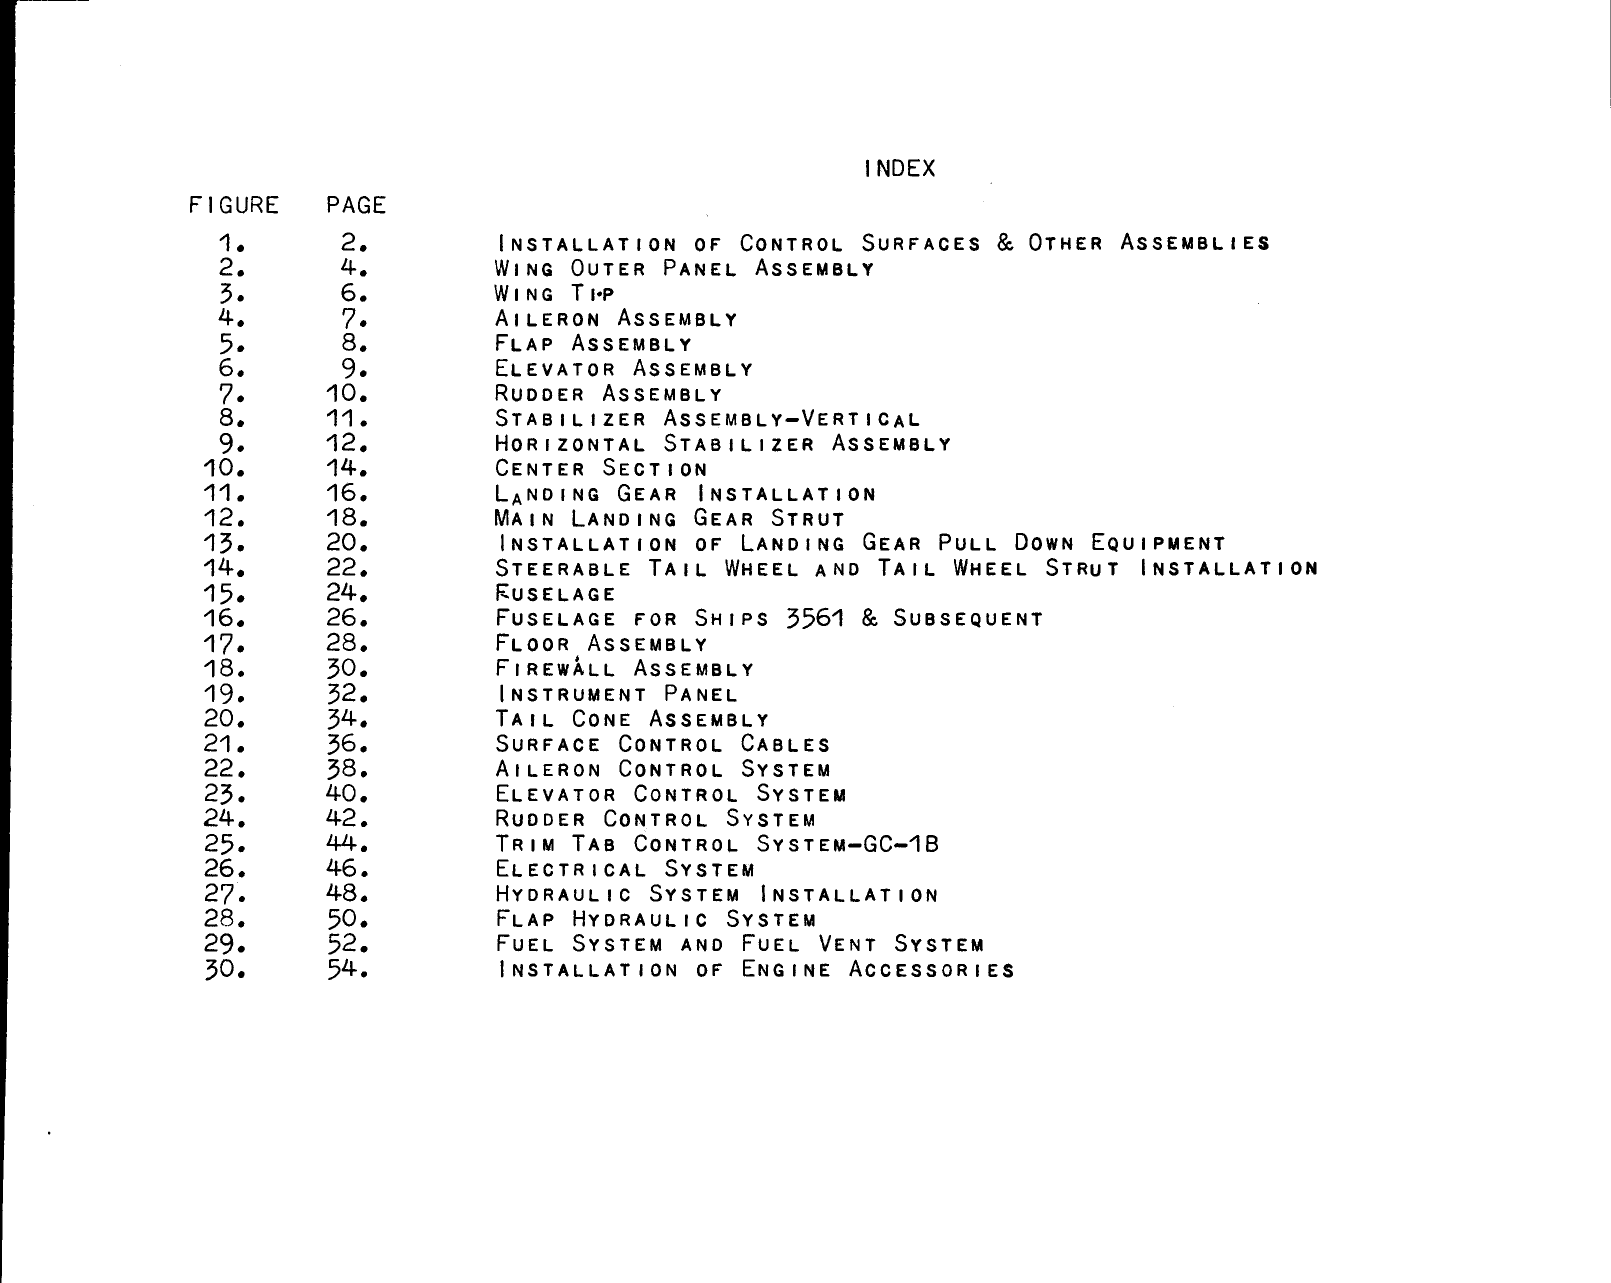 Sample page 5 from AirCorps Library document: Parts Catalog for Swift 125/145 Airplane